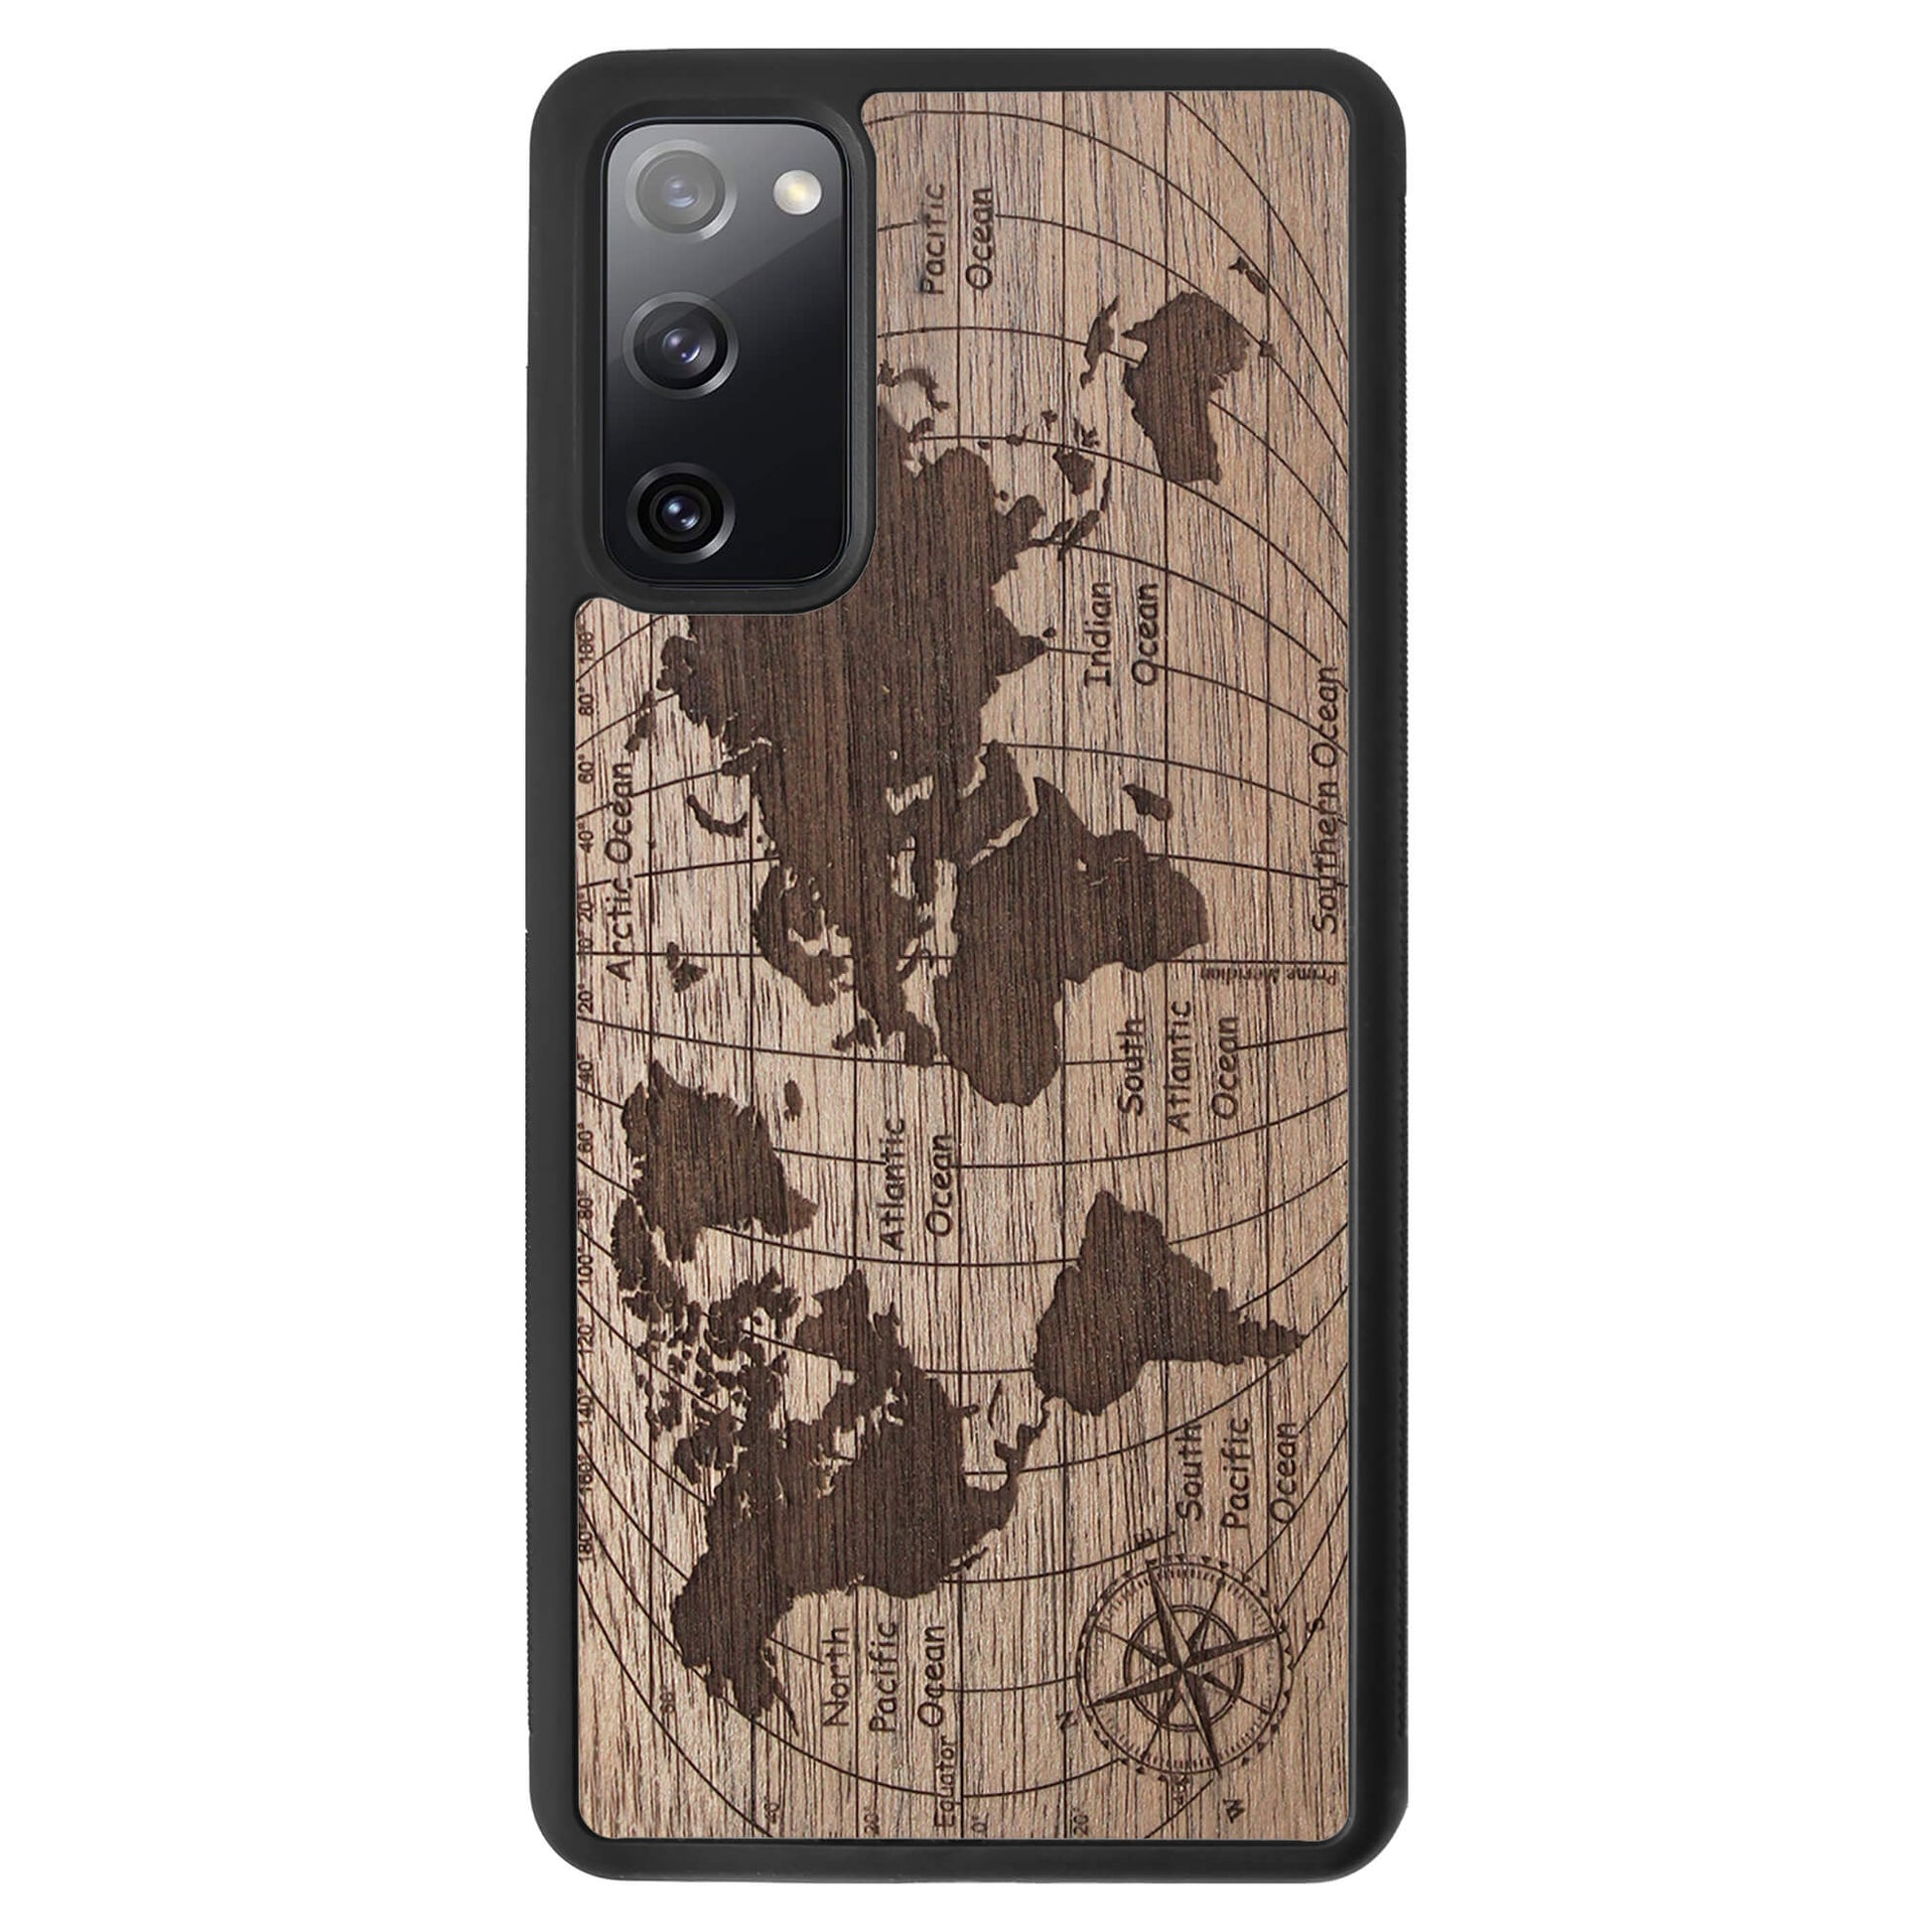 Wooden Case for Samsung Galaxy S20 FE World Map